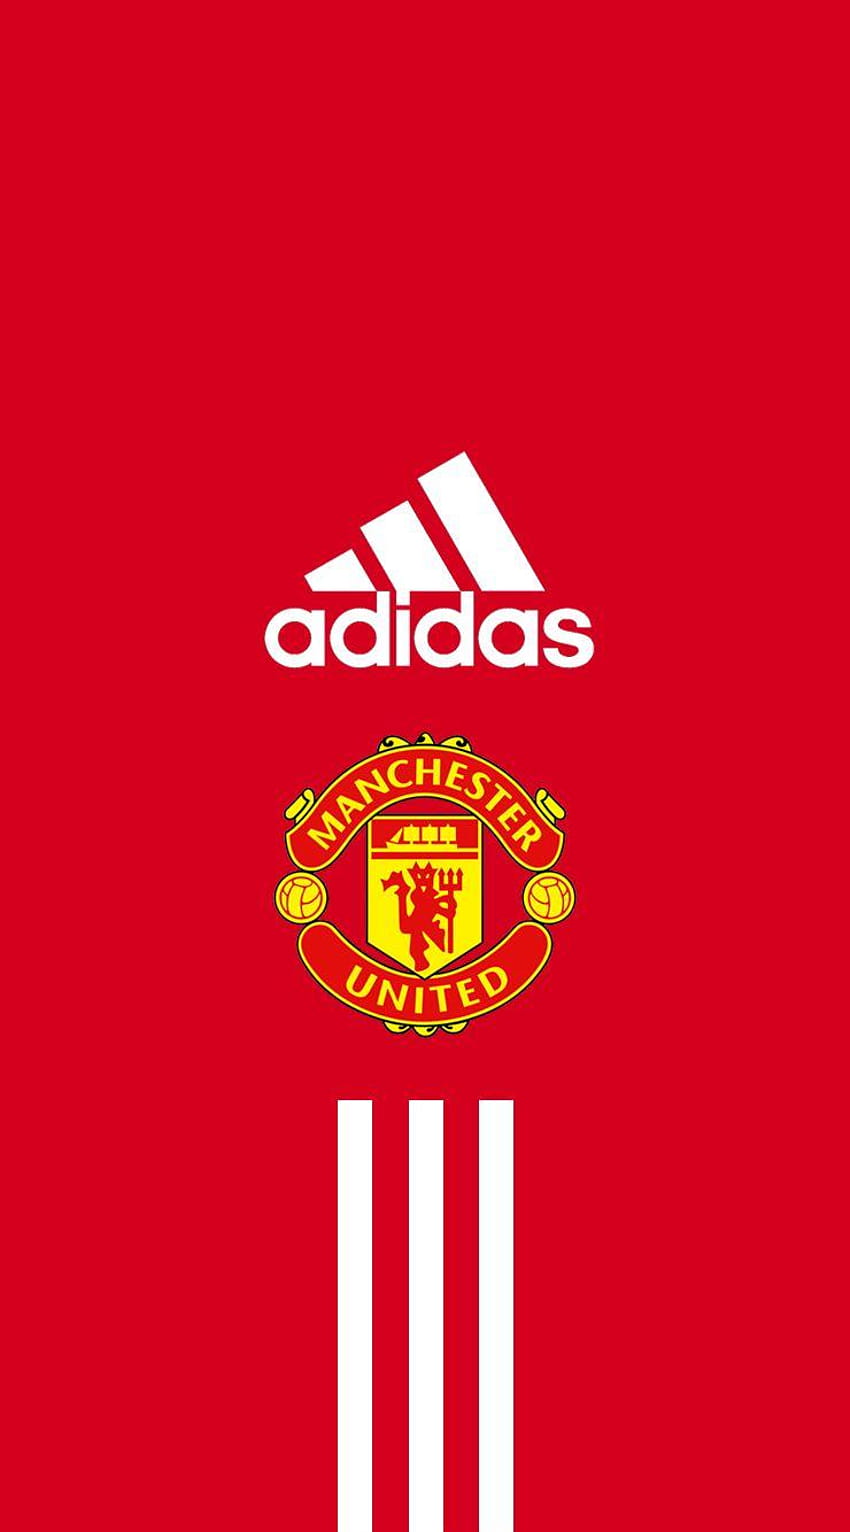 6 Adidas Manchester United, man utd players android 2019 HD phone wallpaper